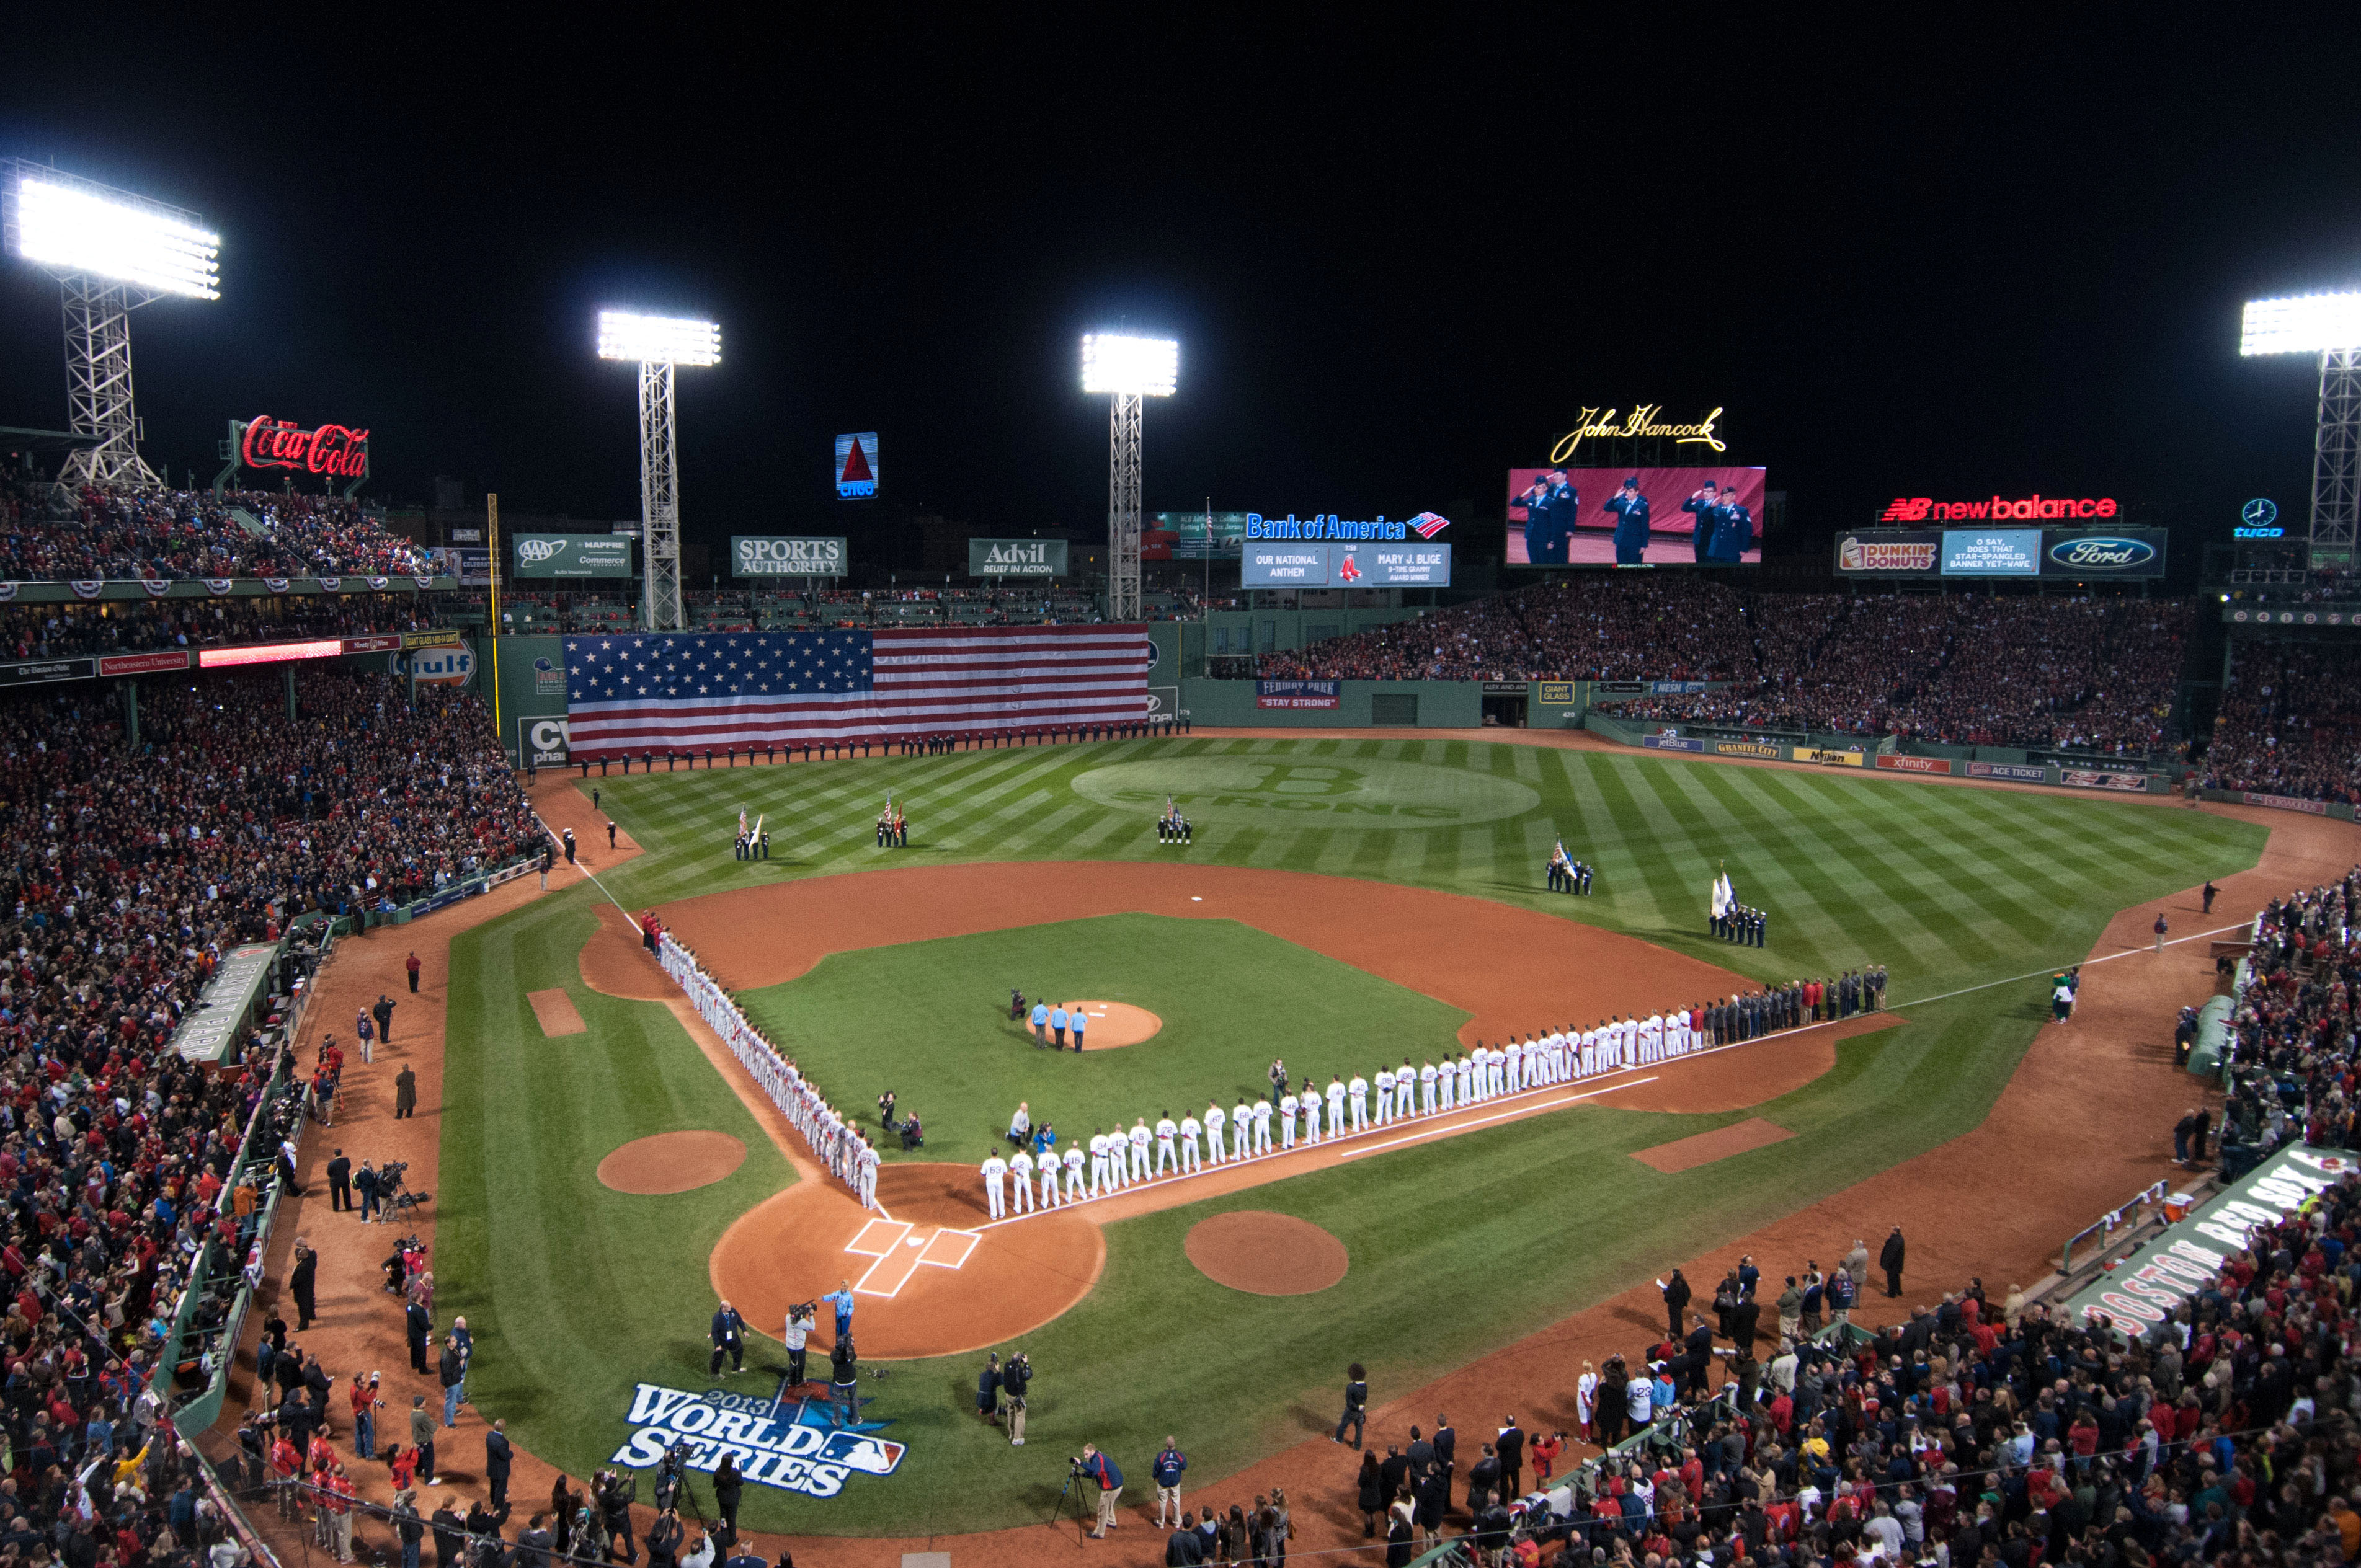 The Boston Red Sox Win the 2013 World Series